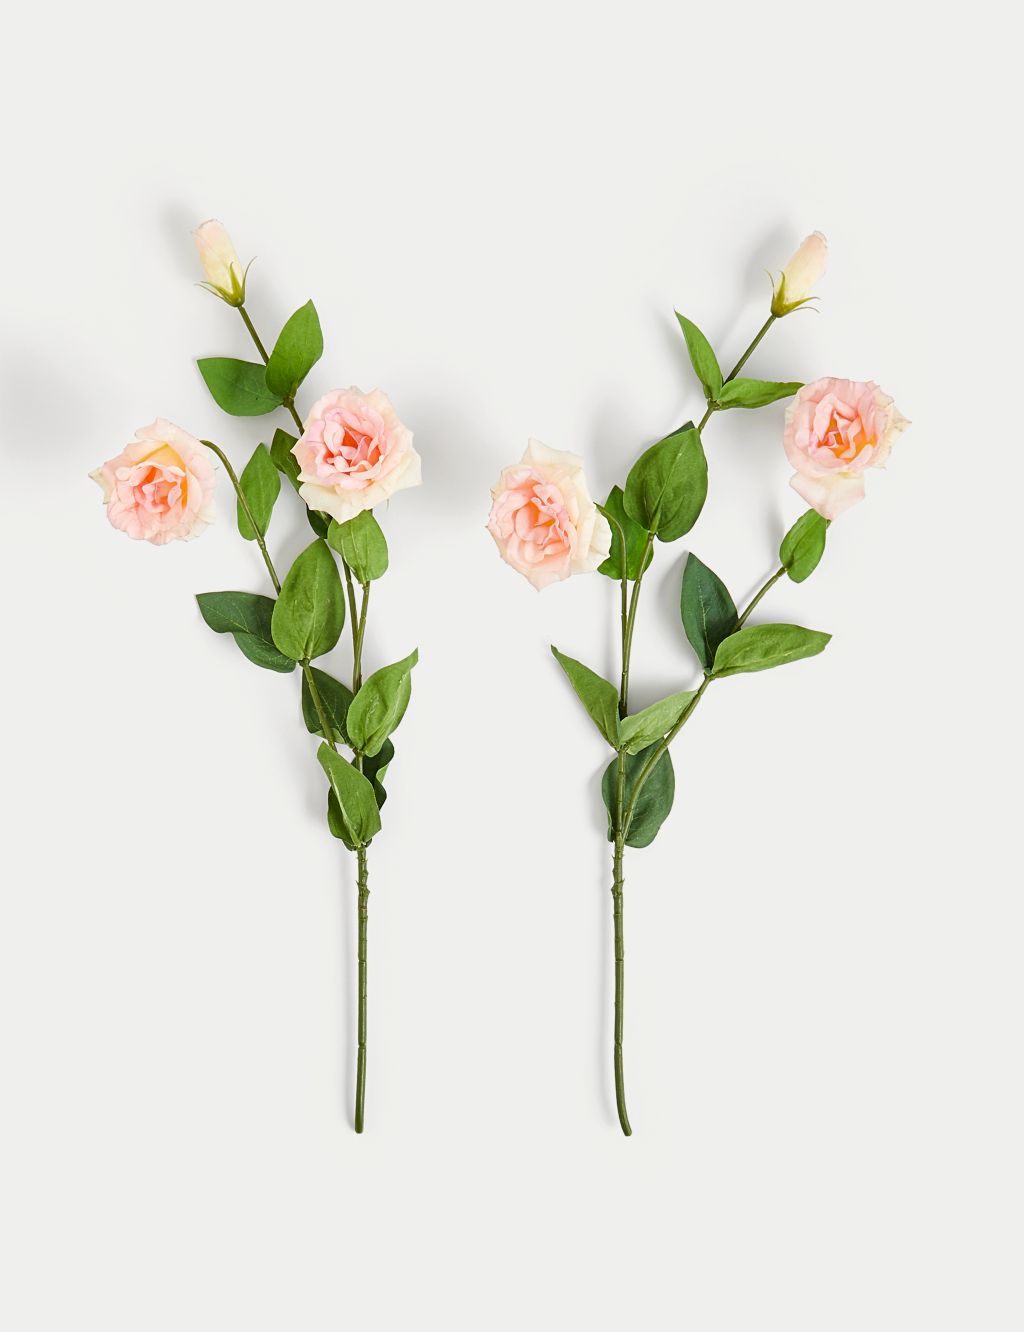 Set of 2 Artificial Real Touch Lisianthus Stems